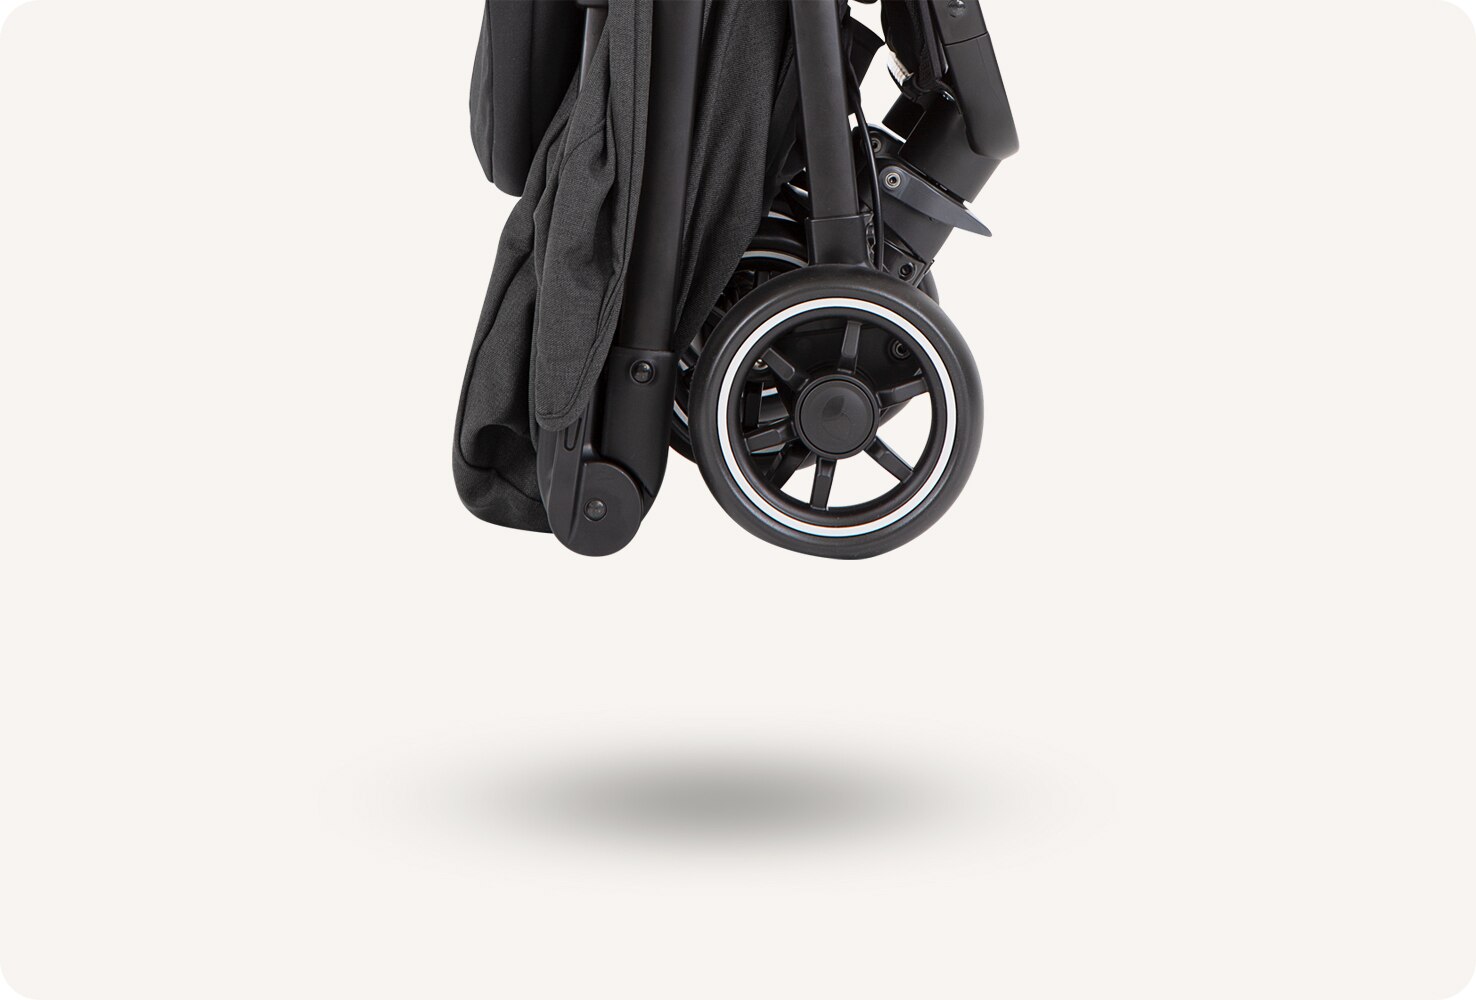  A folded Pact Flex stroller floating above the ground.